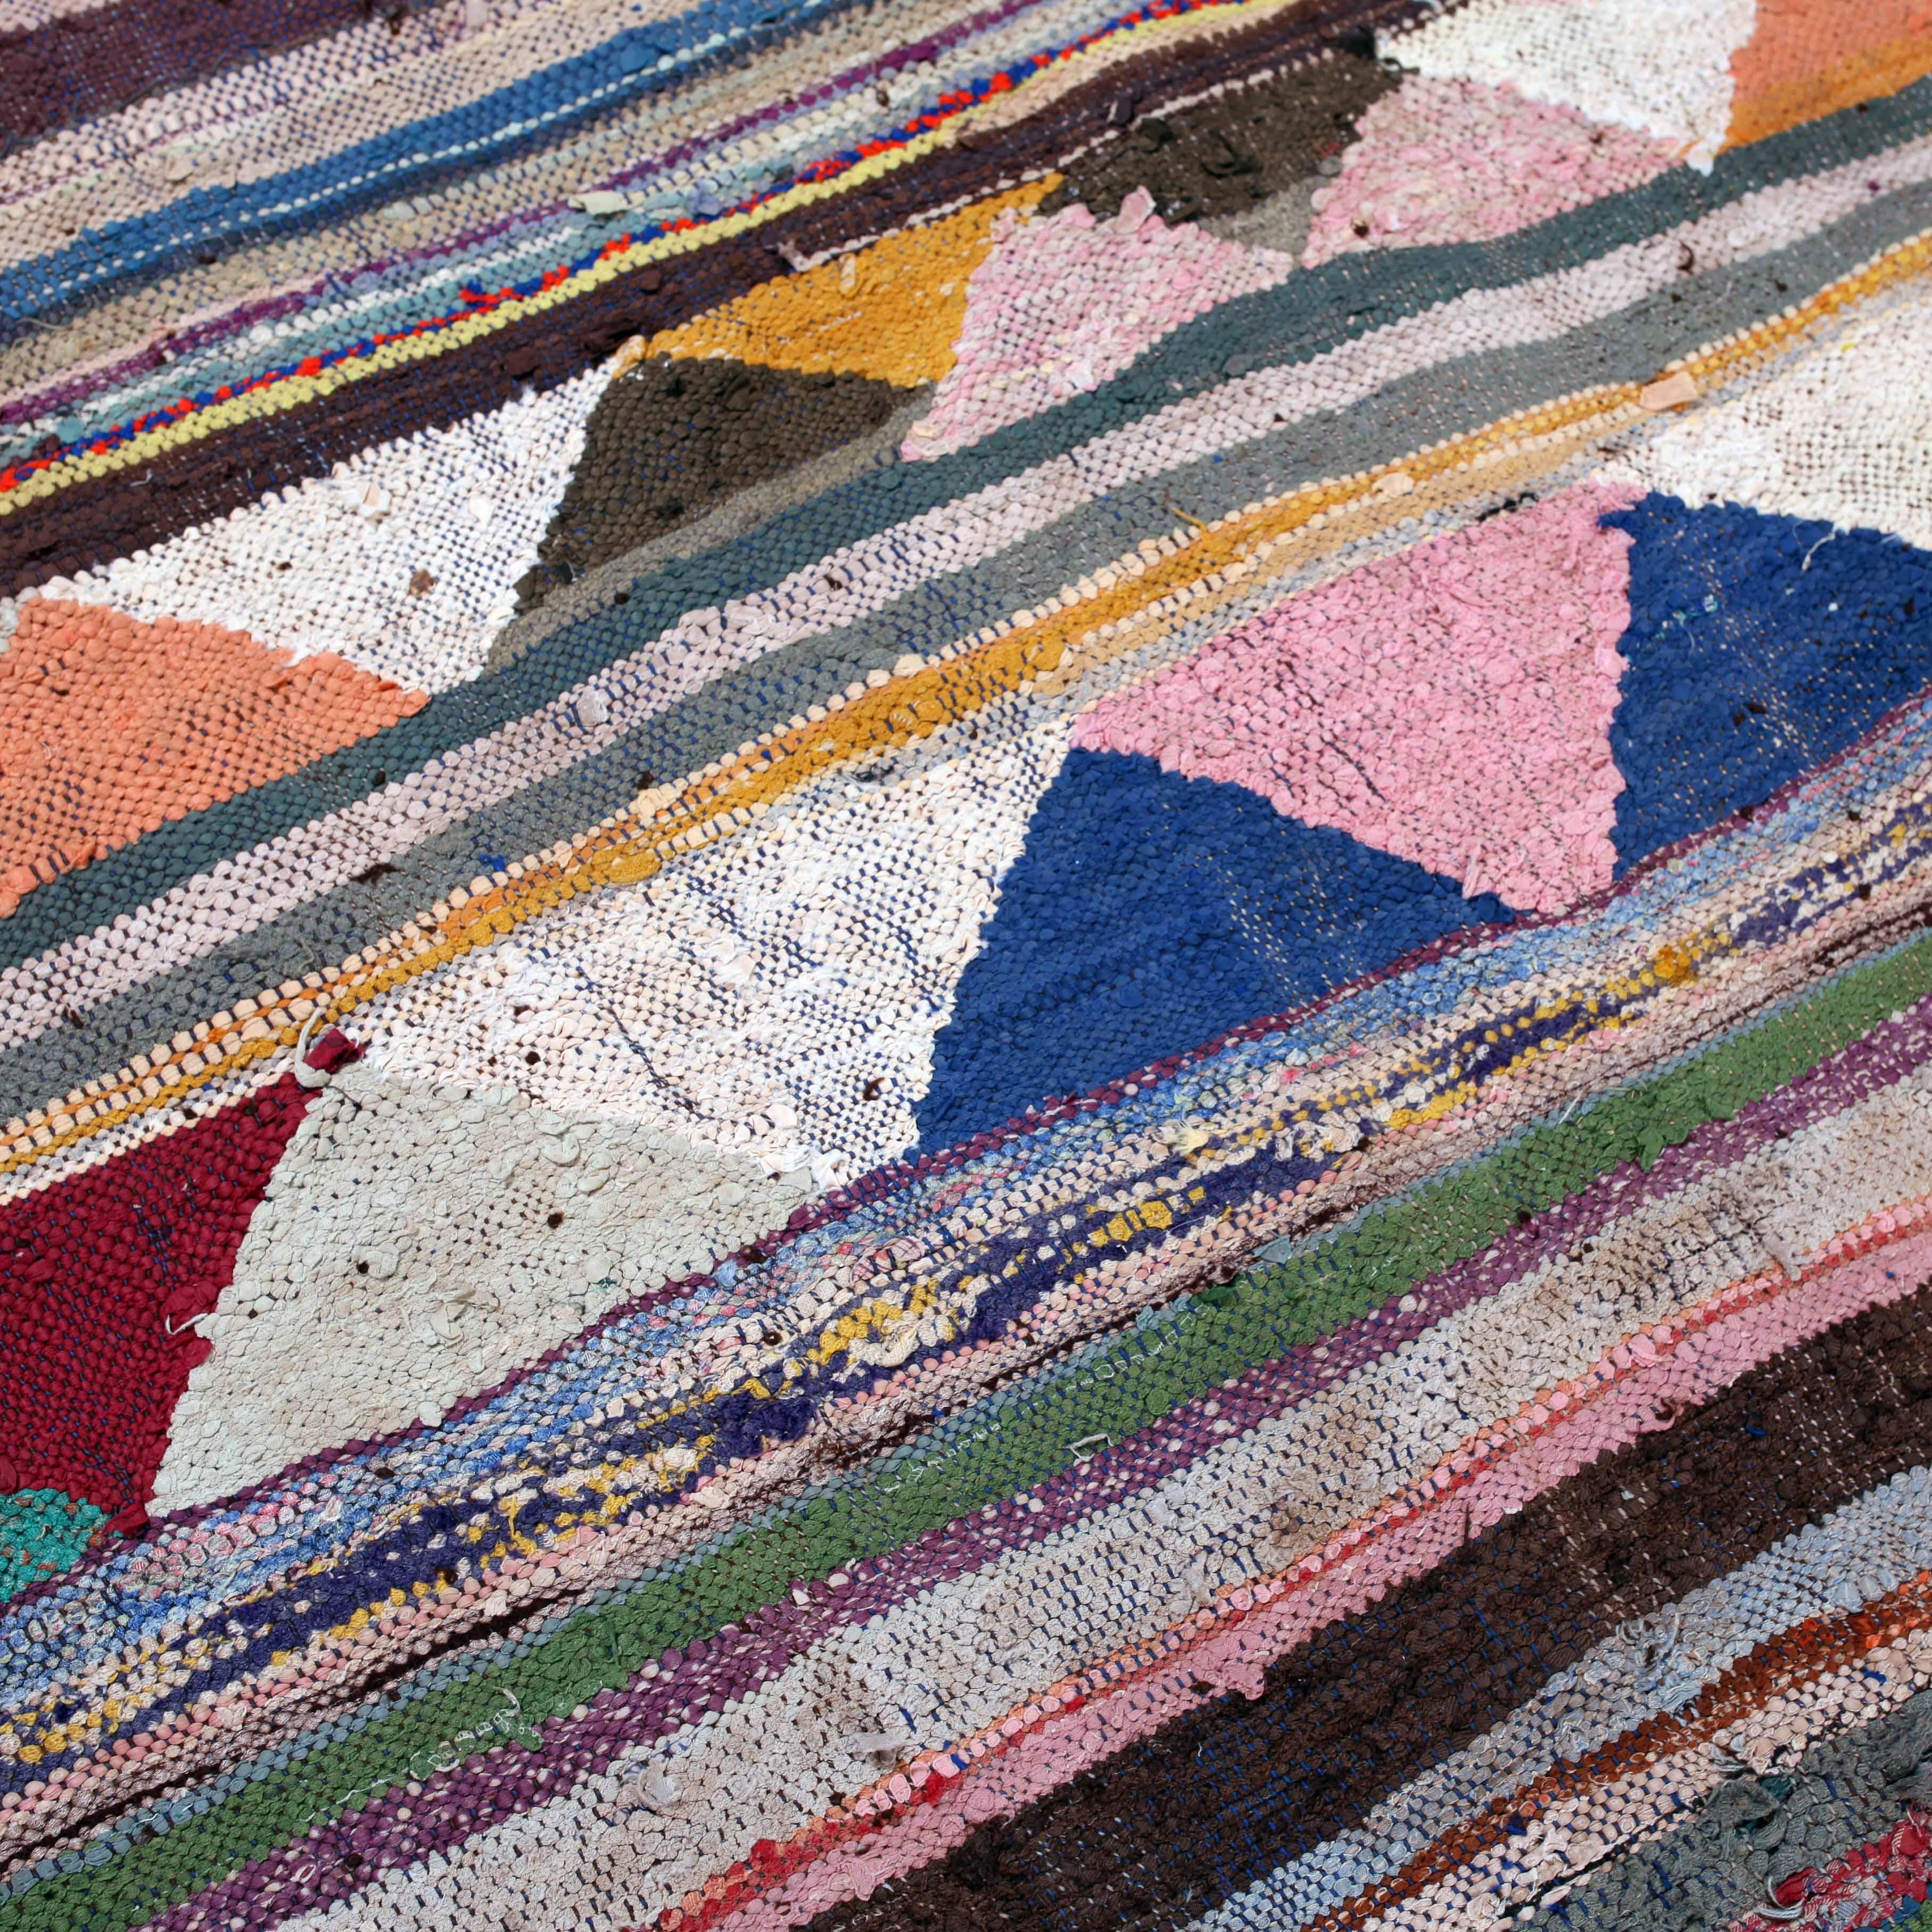 This emblazoned handwoven rug from Morocco brings every room to life. The materials used include recycled rag strips and yarns from a variety of found textile remnants including wool, cotton, synthetic fibers.

From the late 1980s, the making of